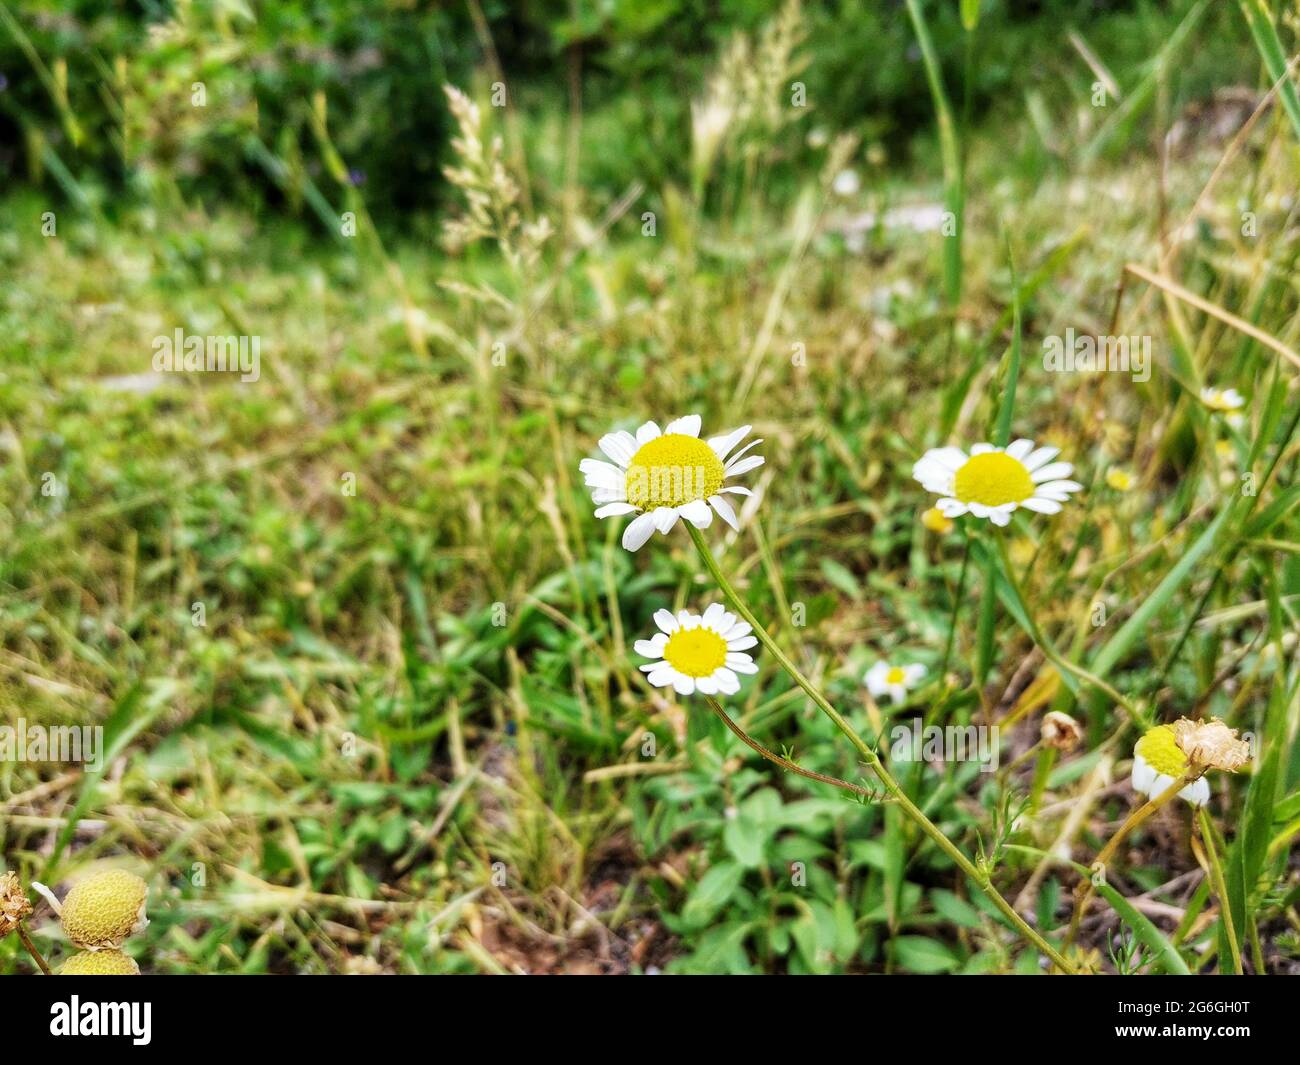 White flower in green grass field. Spring summer nature photo. Daisy flower in the field. Stock Photo